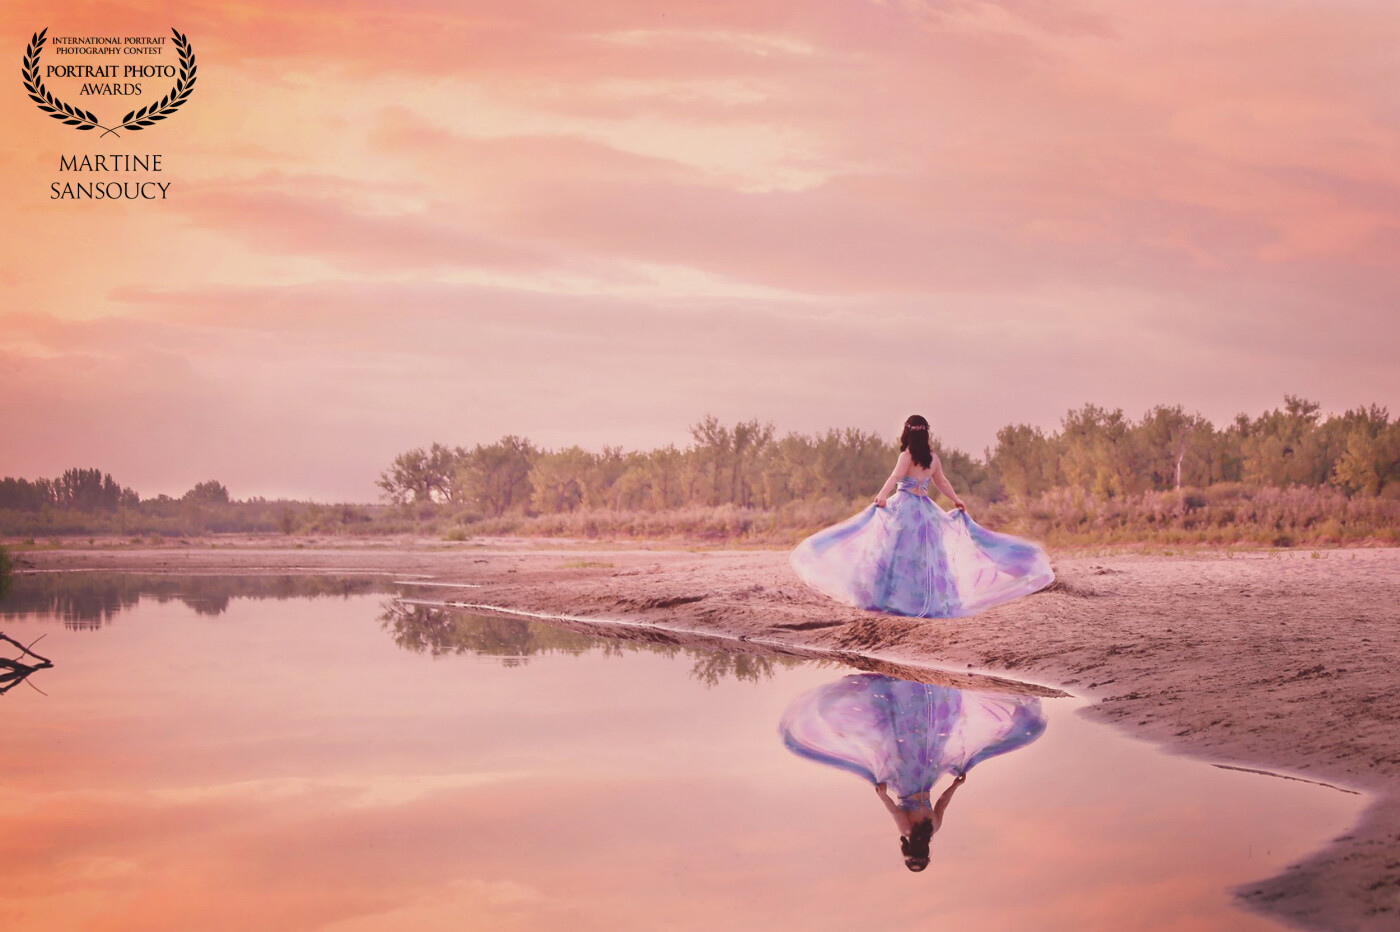 This was the most magical grad session. As the night was ended I caught a perfect reflection of her in the lake and it was just breath-taking with her beautiful gown!